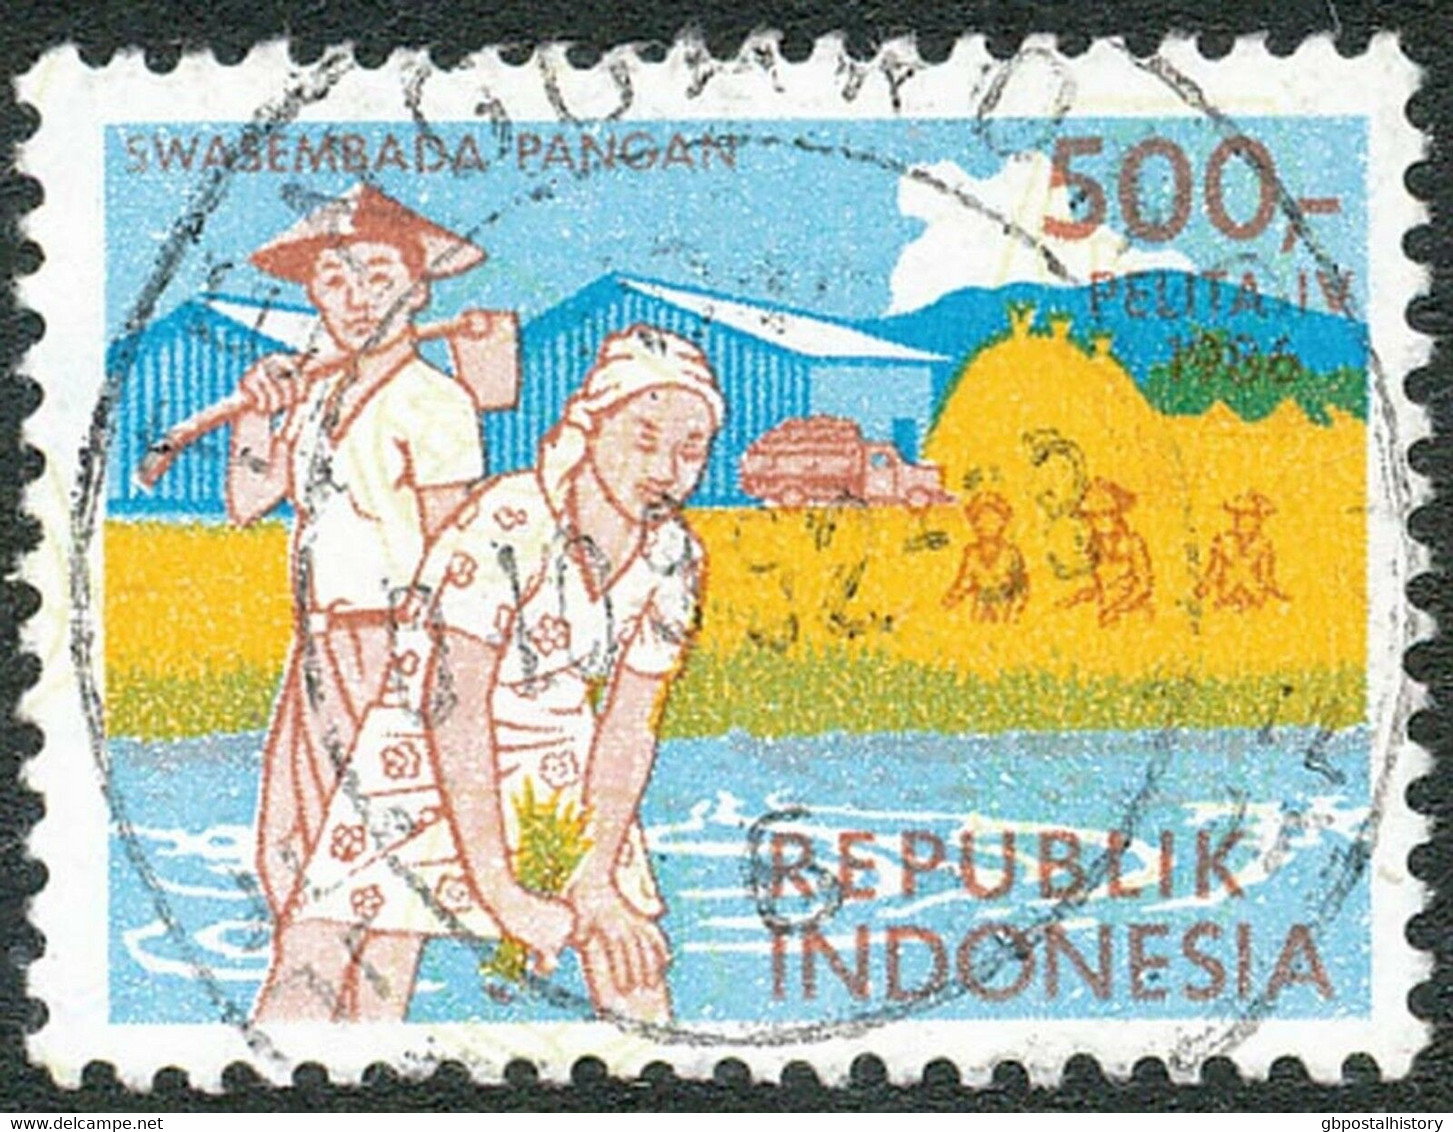 INDONESIA 1986 4th.Five-year Plan Rice Fields 500 Rp VARIETY MISSING BROWN COLOR - Indonesien